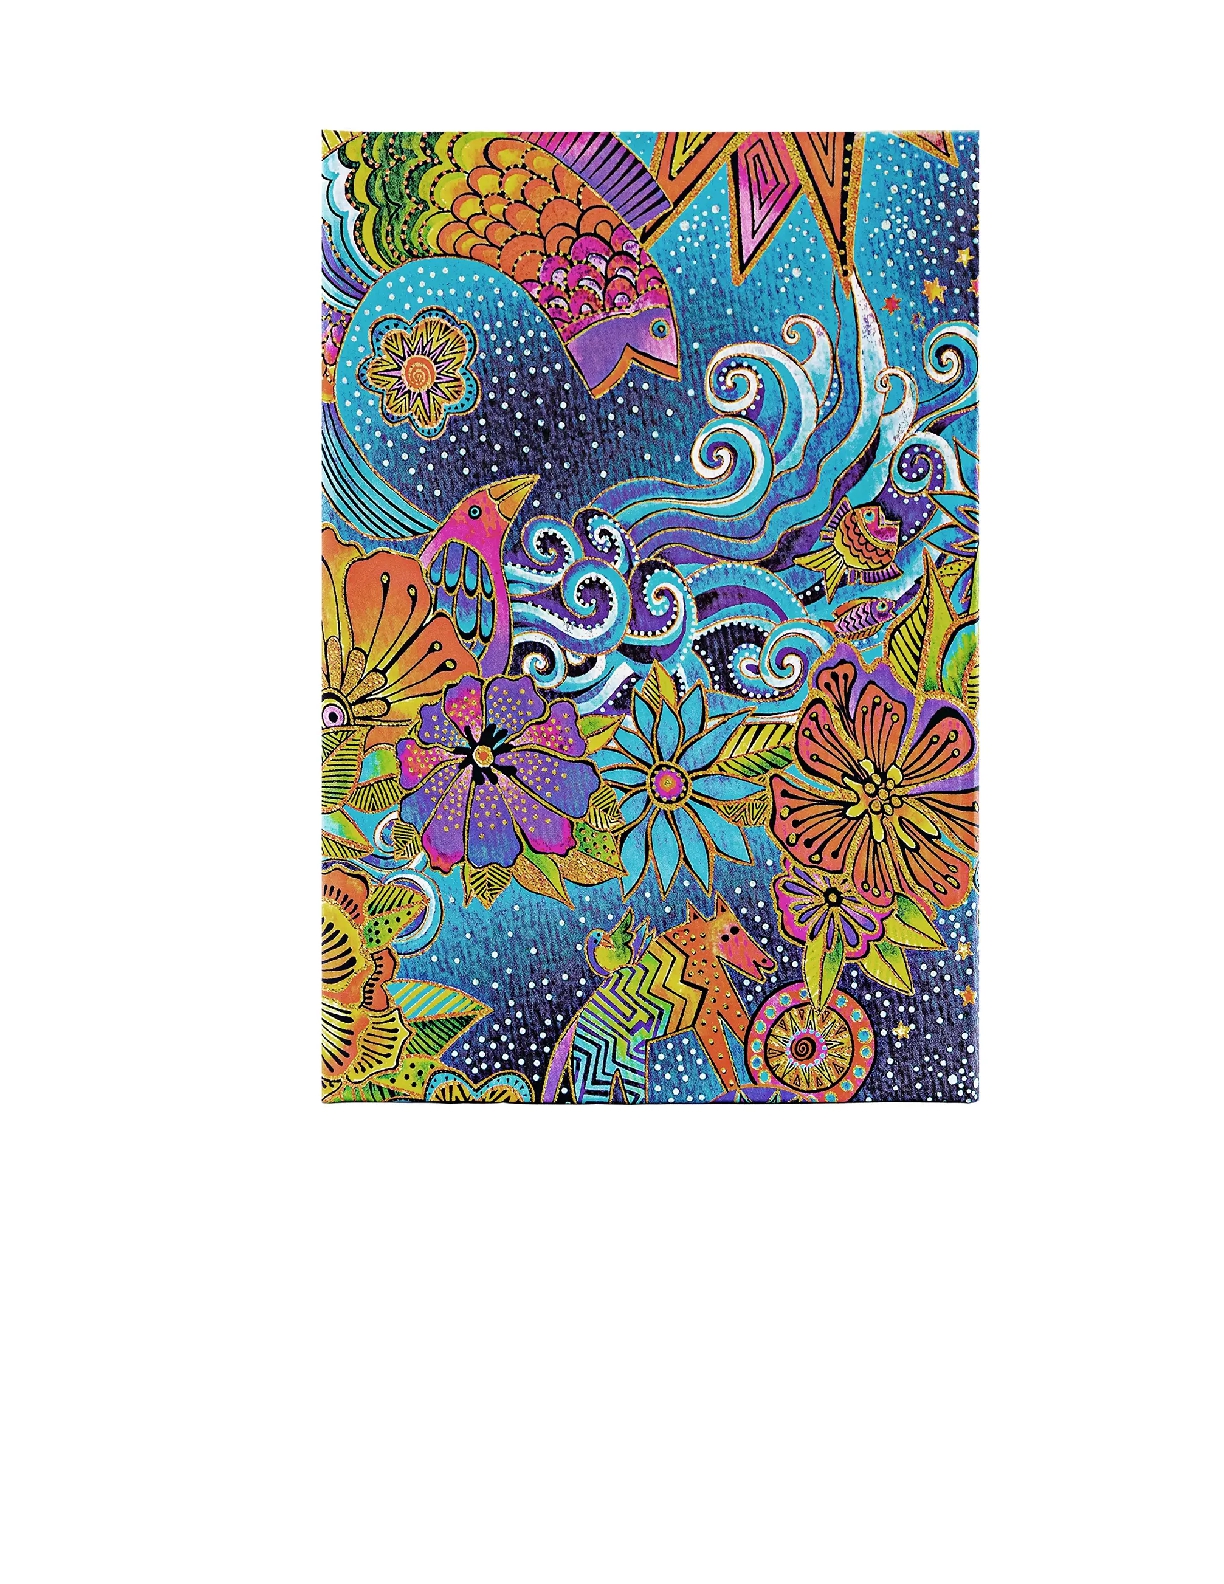 Celestial Magic, Whimsical Creations, Hardcover Journals, Mini, Unlined, Wrap, 176 Pg, 85 GSM